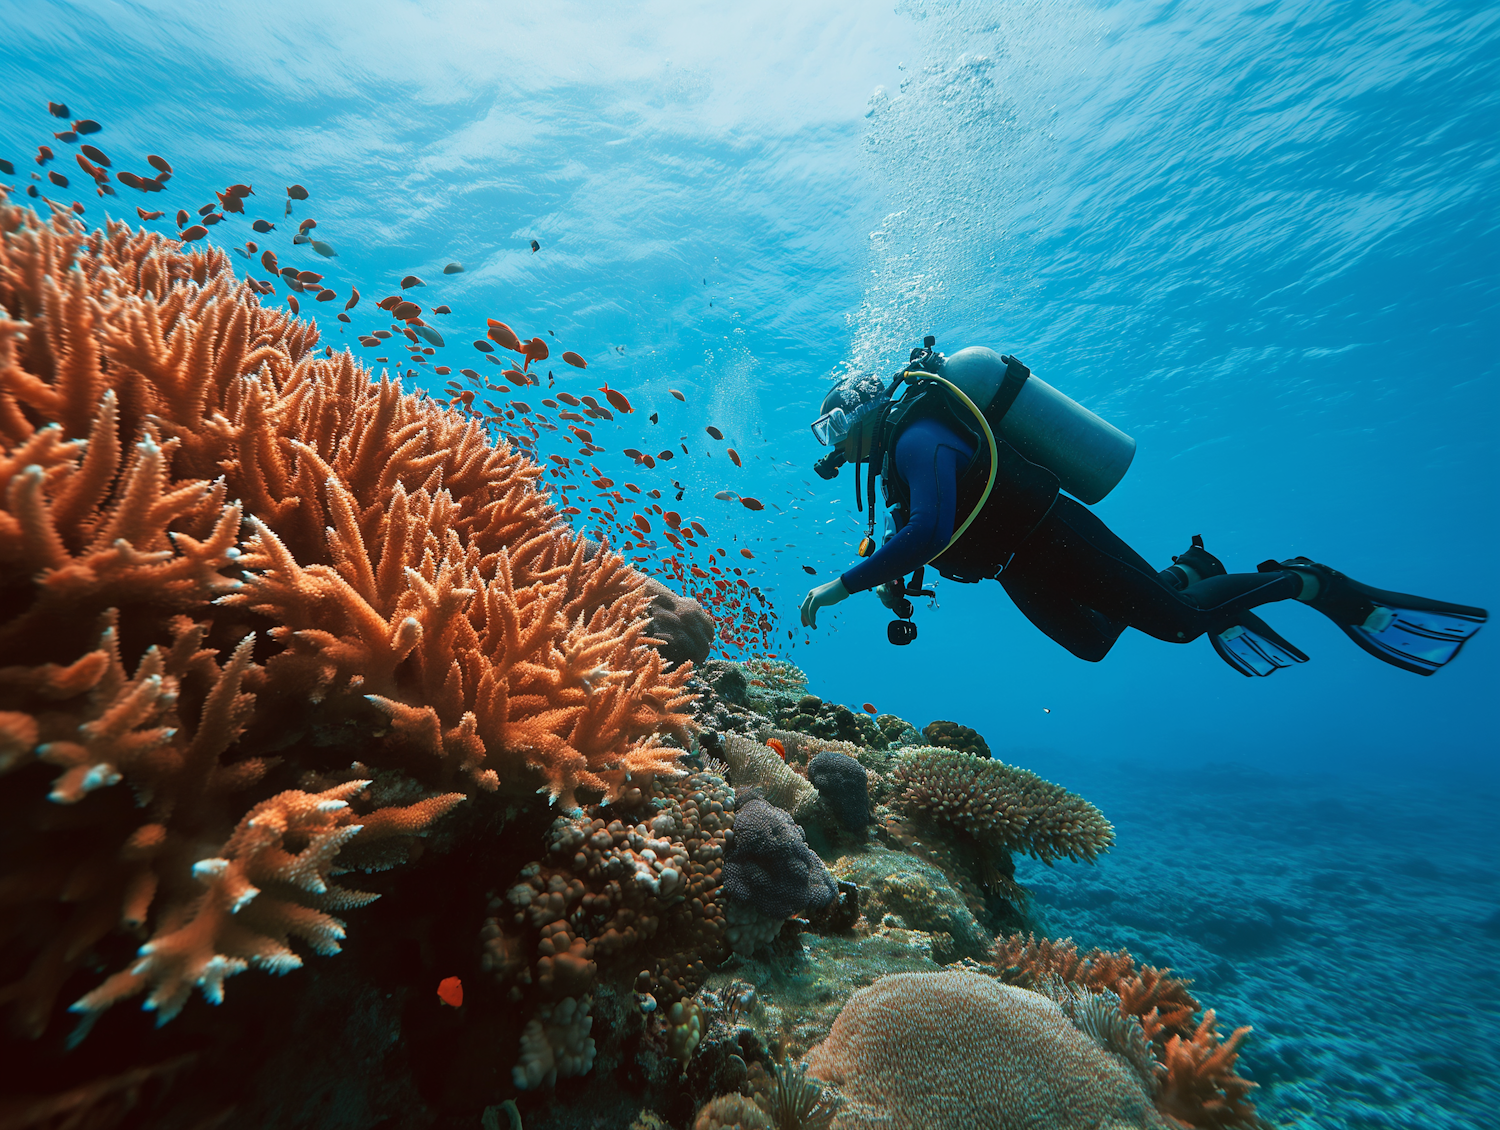 Scuba Diver Amidst Fiery Coral Reef